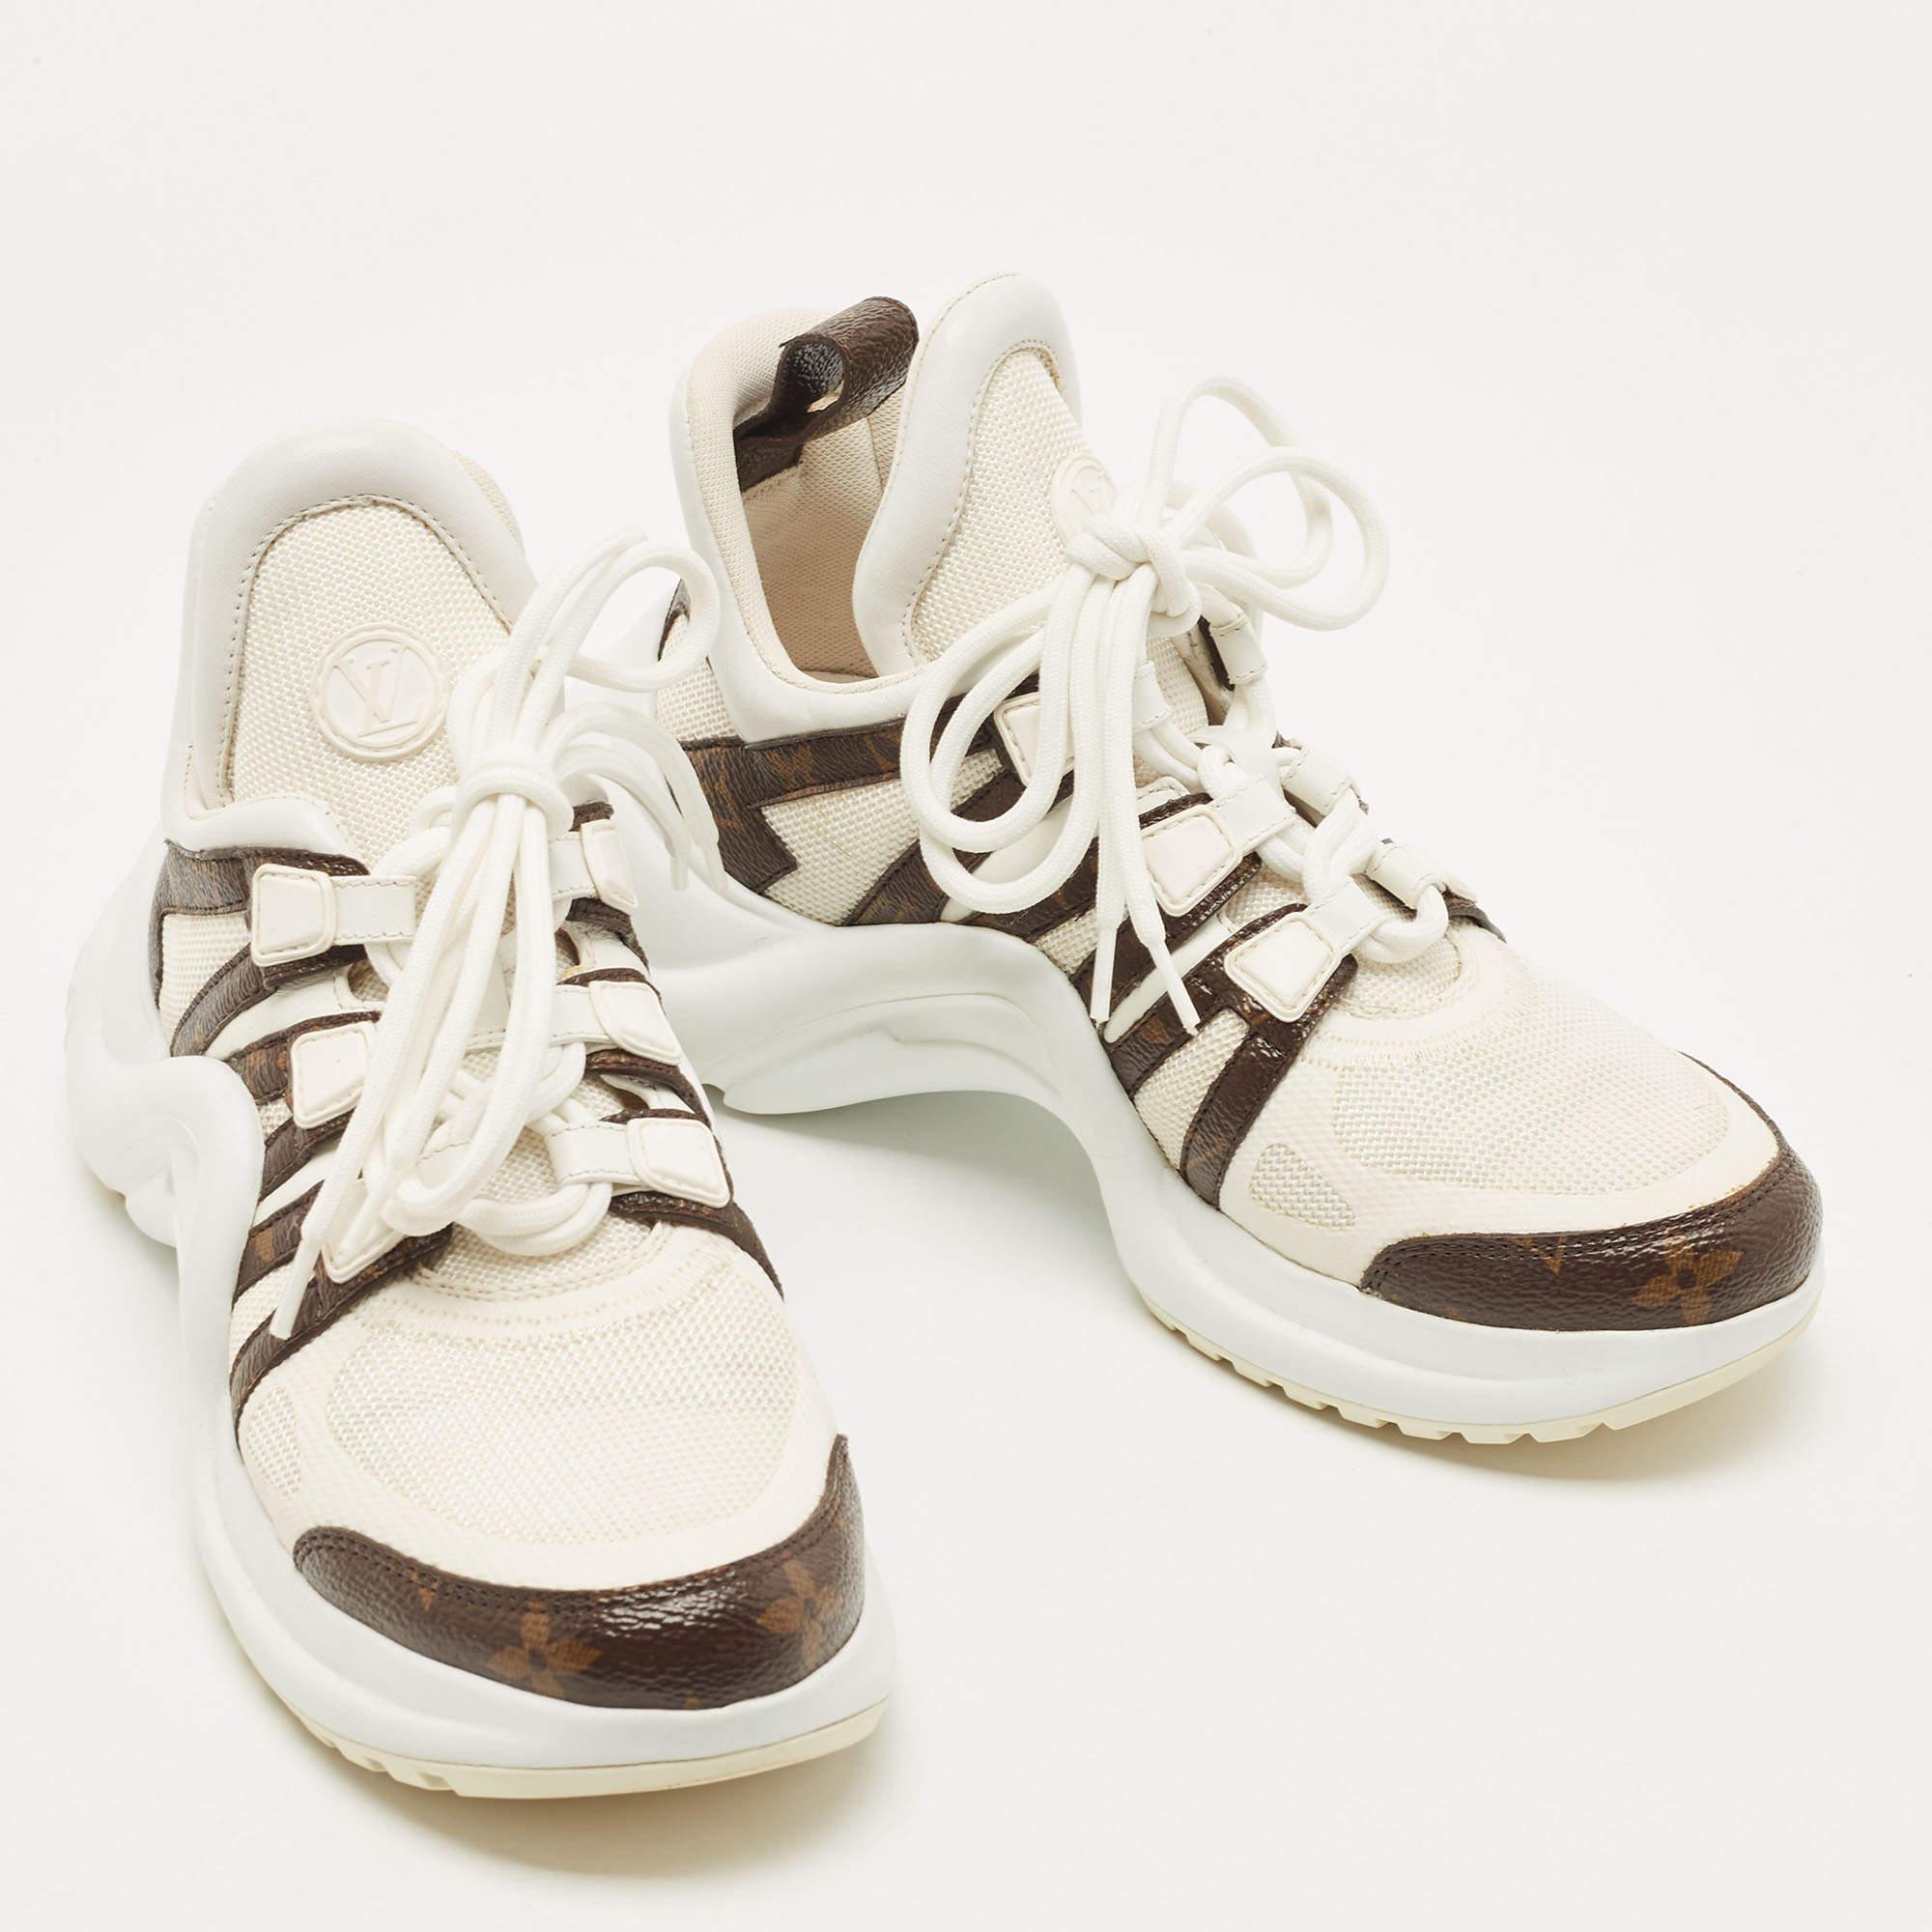 Women's Louis Vuitton White/Monogram Canvas and Leather Archlight Sneakers Size 37